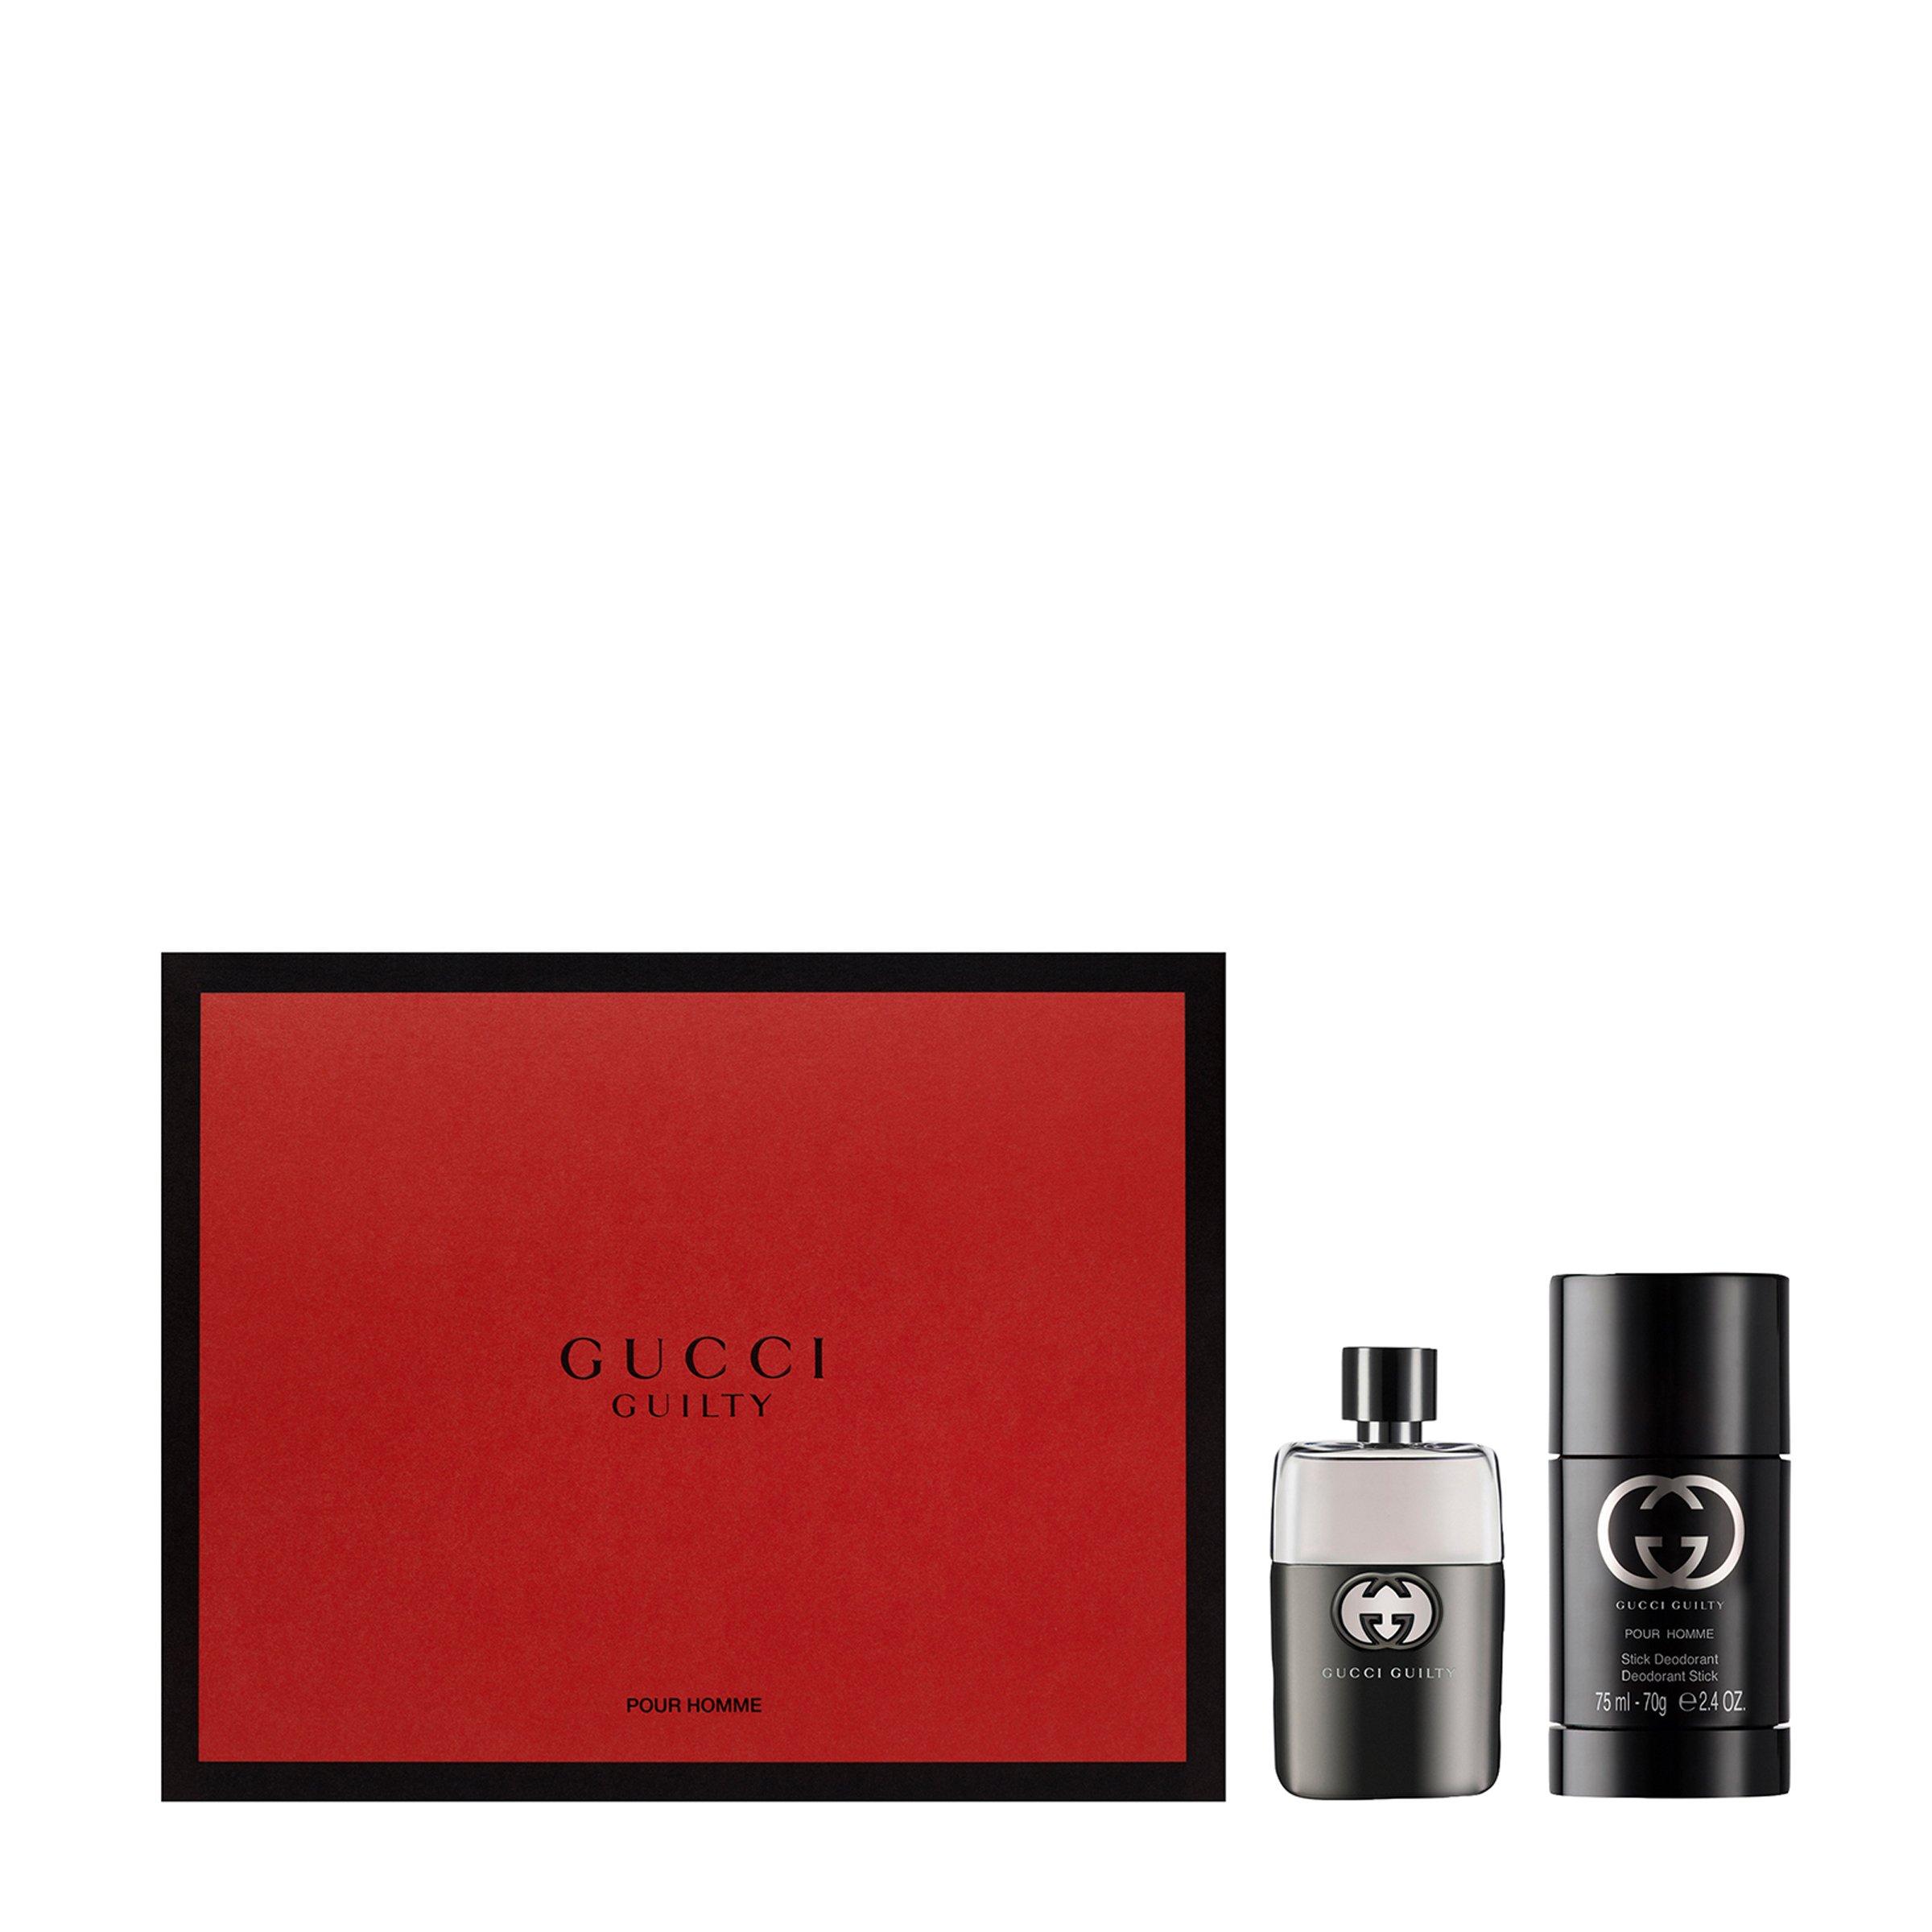 gucci gift set for him